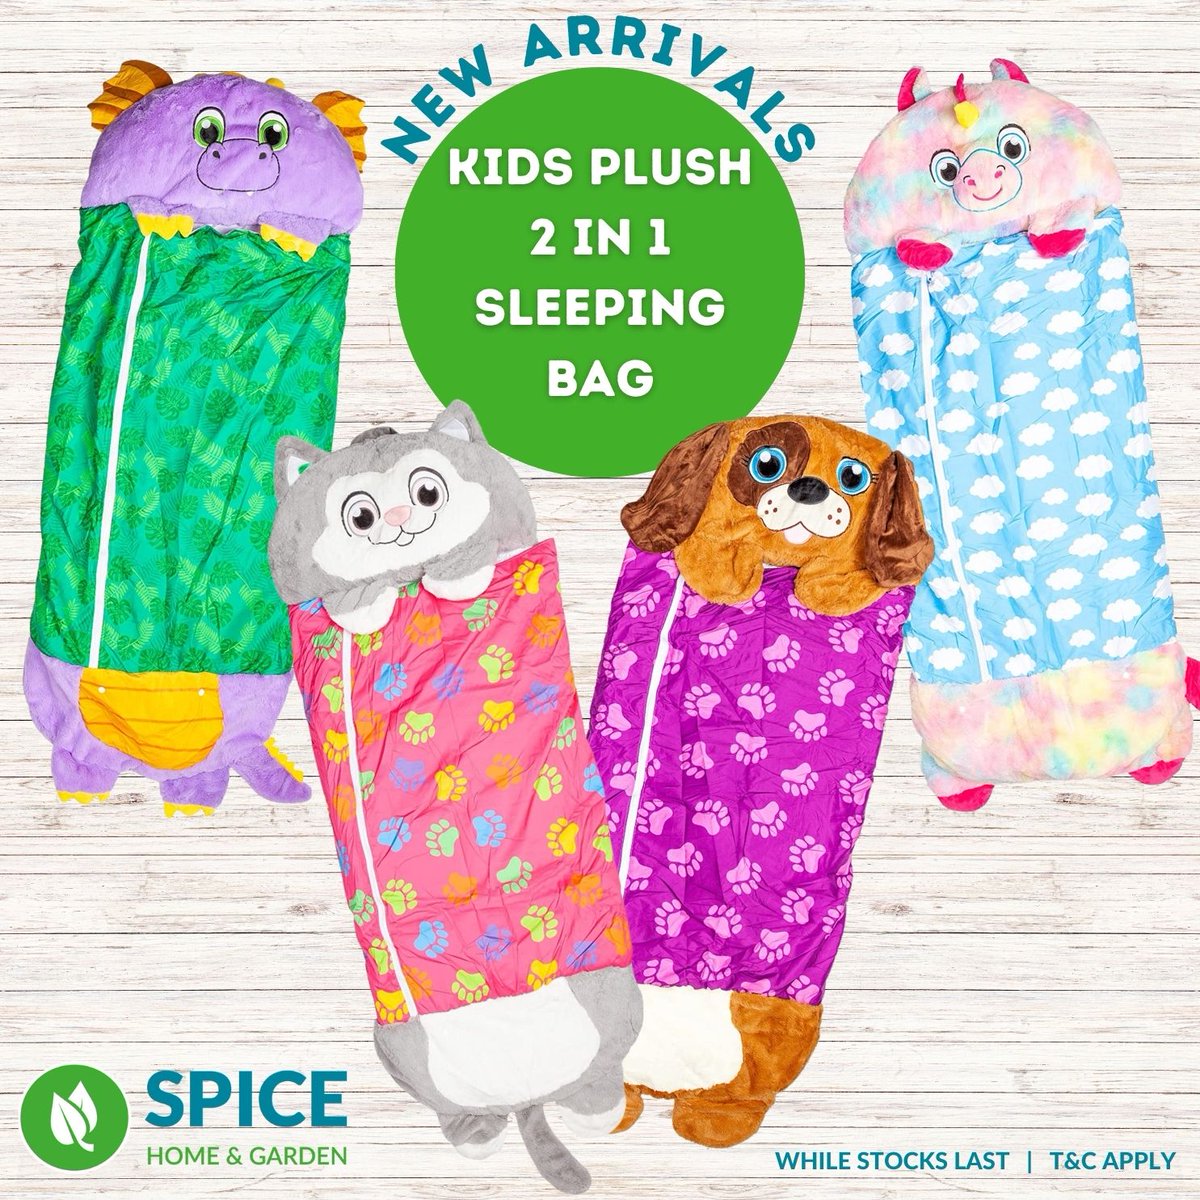 We're excited to announce the arrival of our new Kids Plush Animal 2 in 1 Sleeping Bags! These adorable sleeping bags are perfect for little ones who love snuggling with their favourite stuffed animals.

#SpiceHomeGarden #Gorey #ShopLocal #ShopIrish